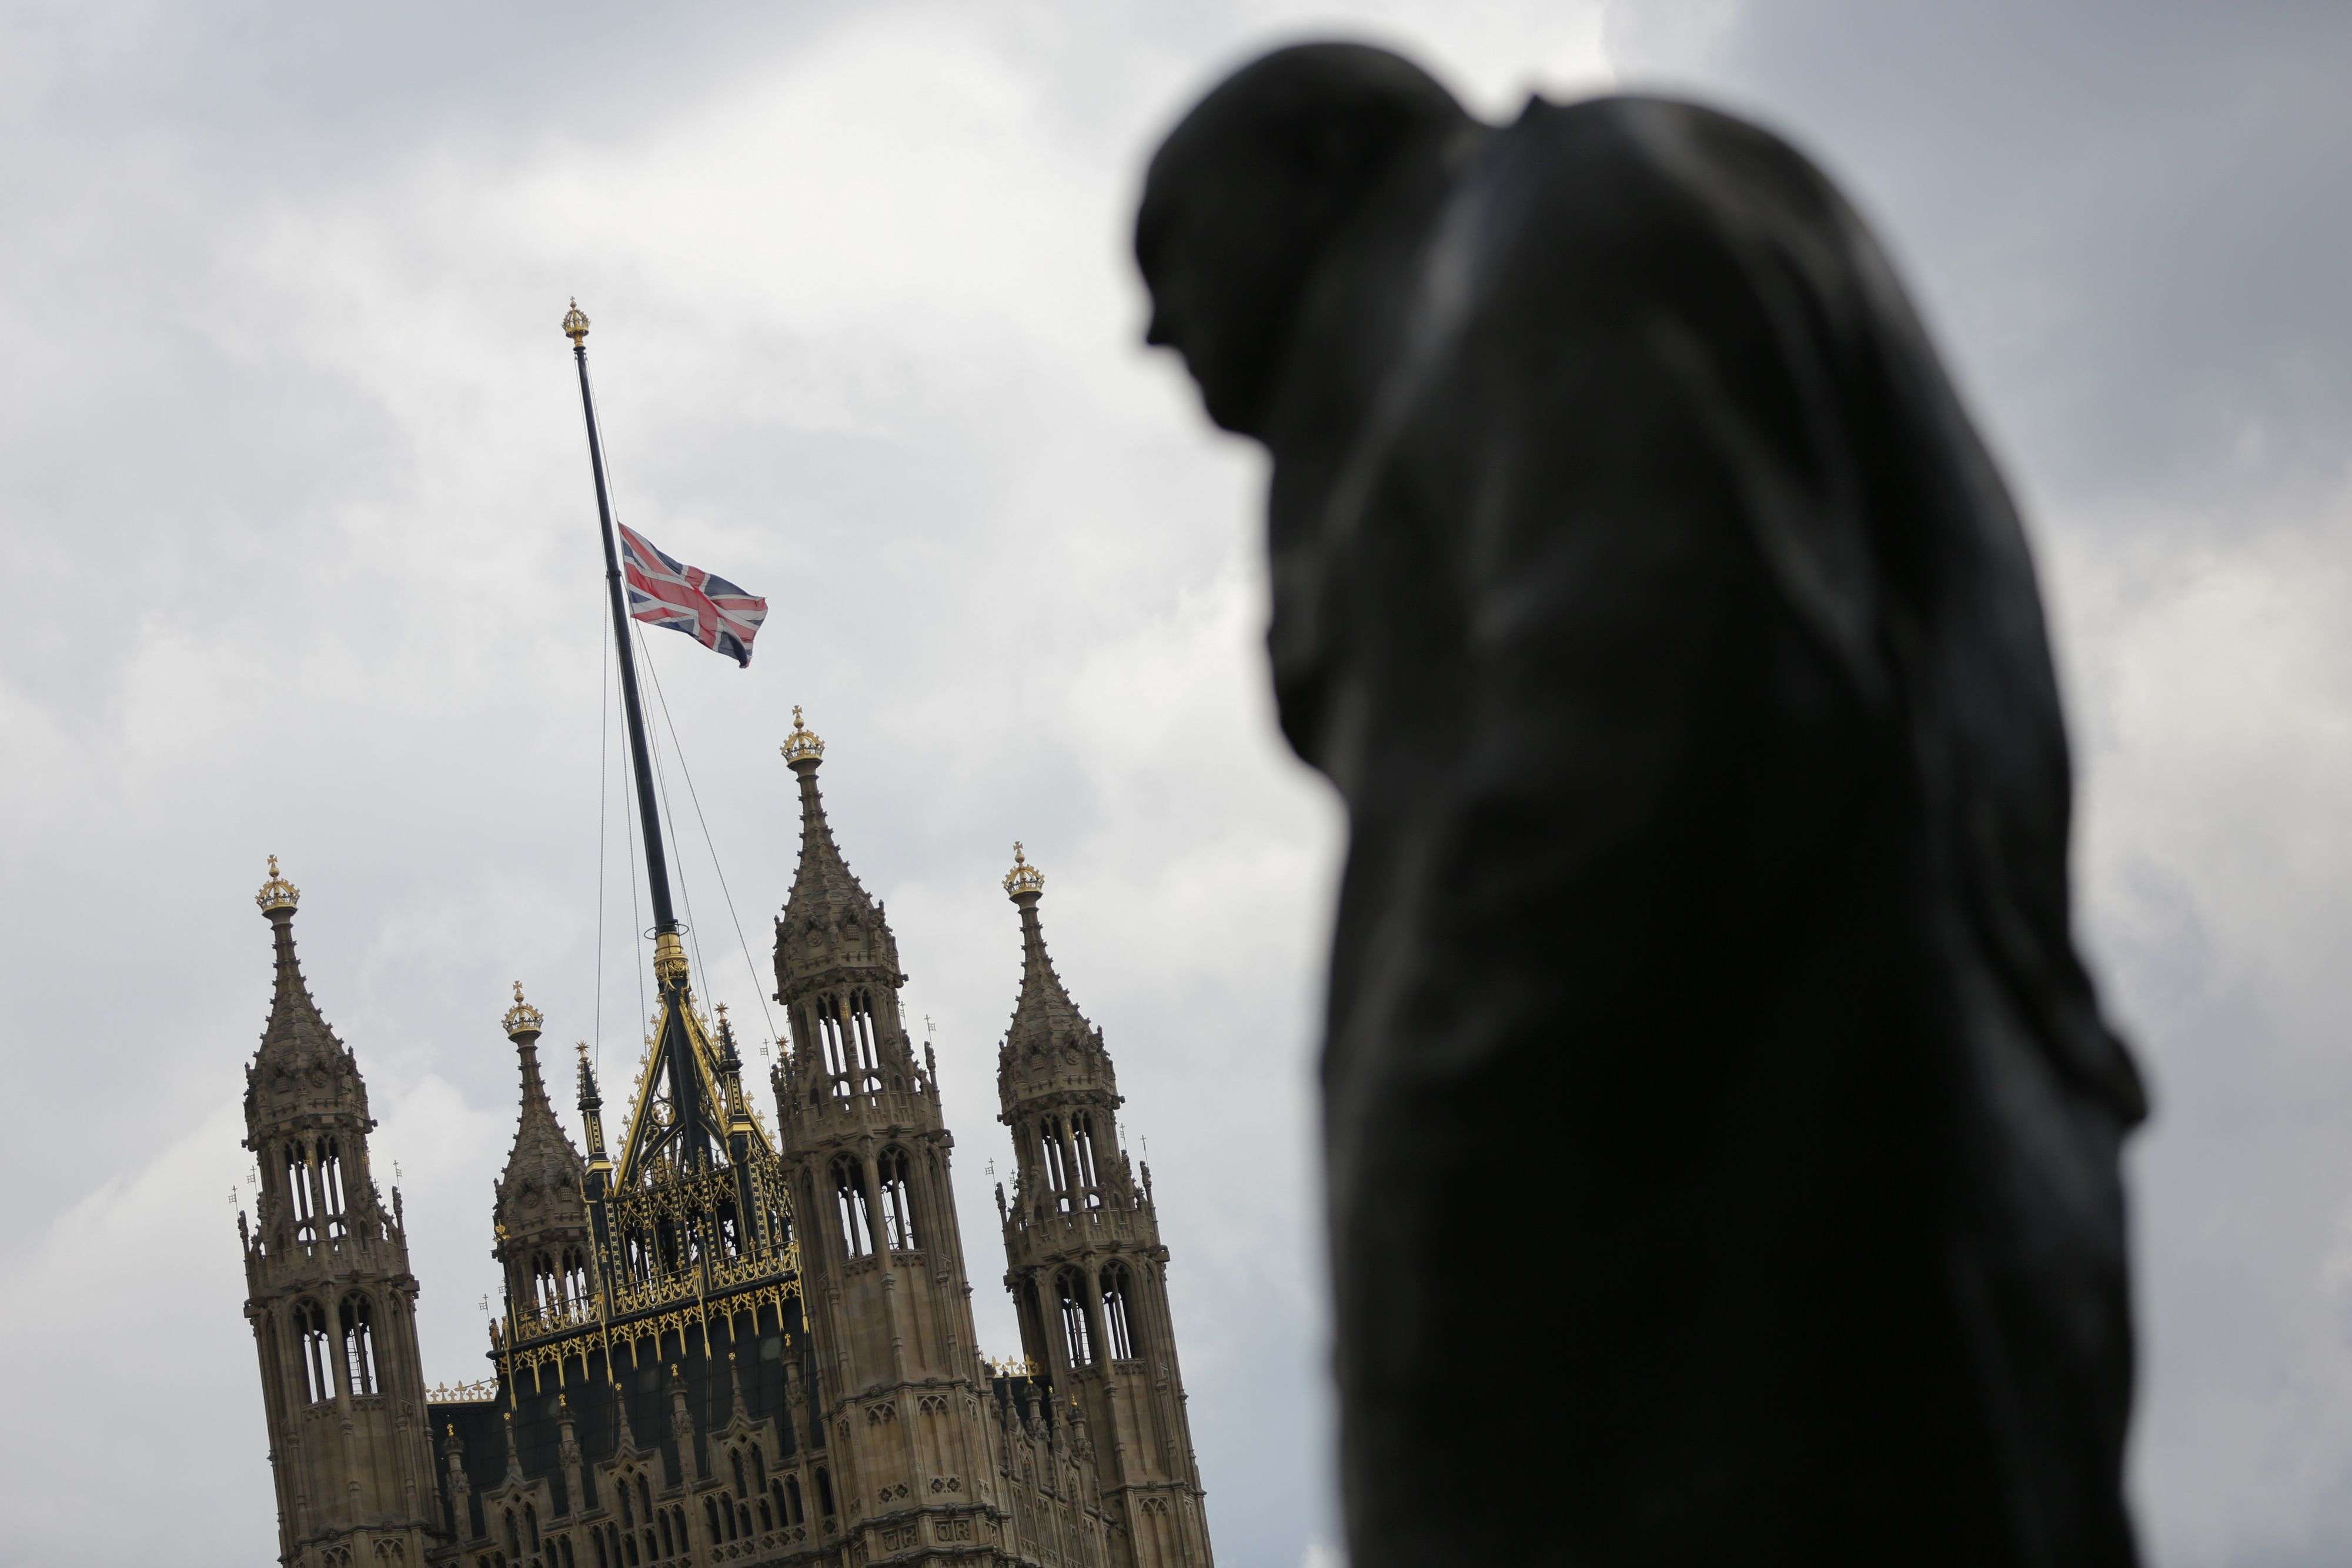 A statue of British prime minister Winston Churchill stands near the Houses of Parliament in London. The remarkable thing about the independent-minded British is that they threw out their war hero in the 1945 elections because he failed to address the social needs of post-war Britain. Photo: AFP